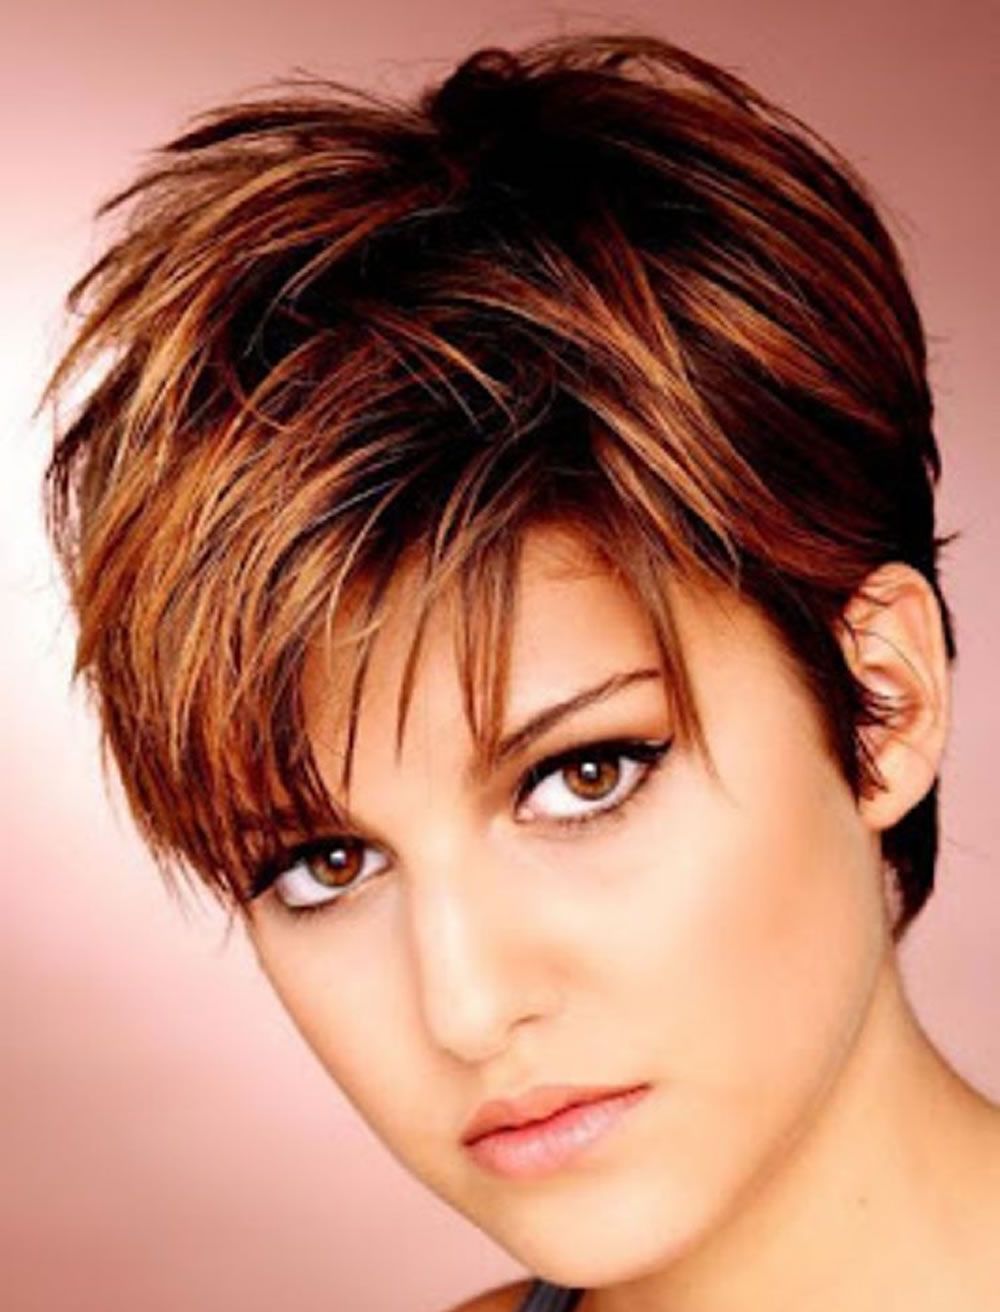 Short Haircuts For Round Face Thin Hair Ideas For 2018 – Hairstyles Throughout Short Hairstyles For Full Round Faces (Photo 22 of 25)